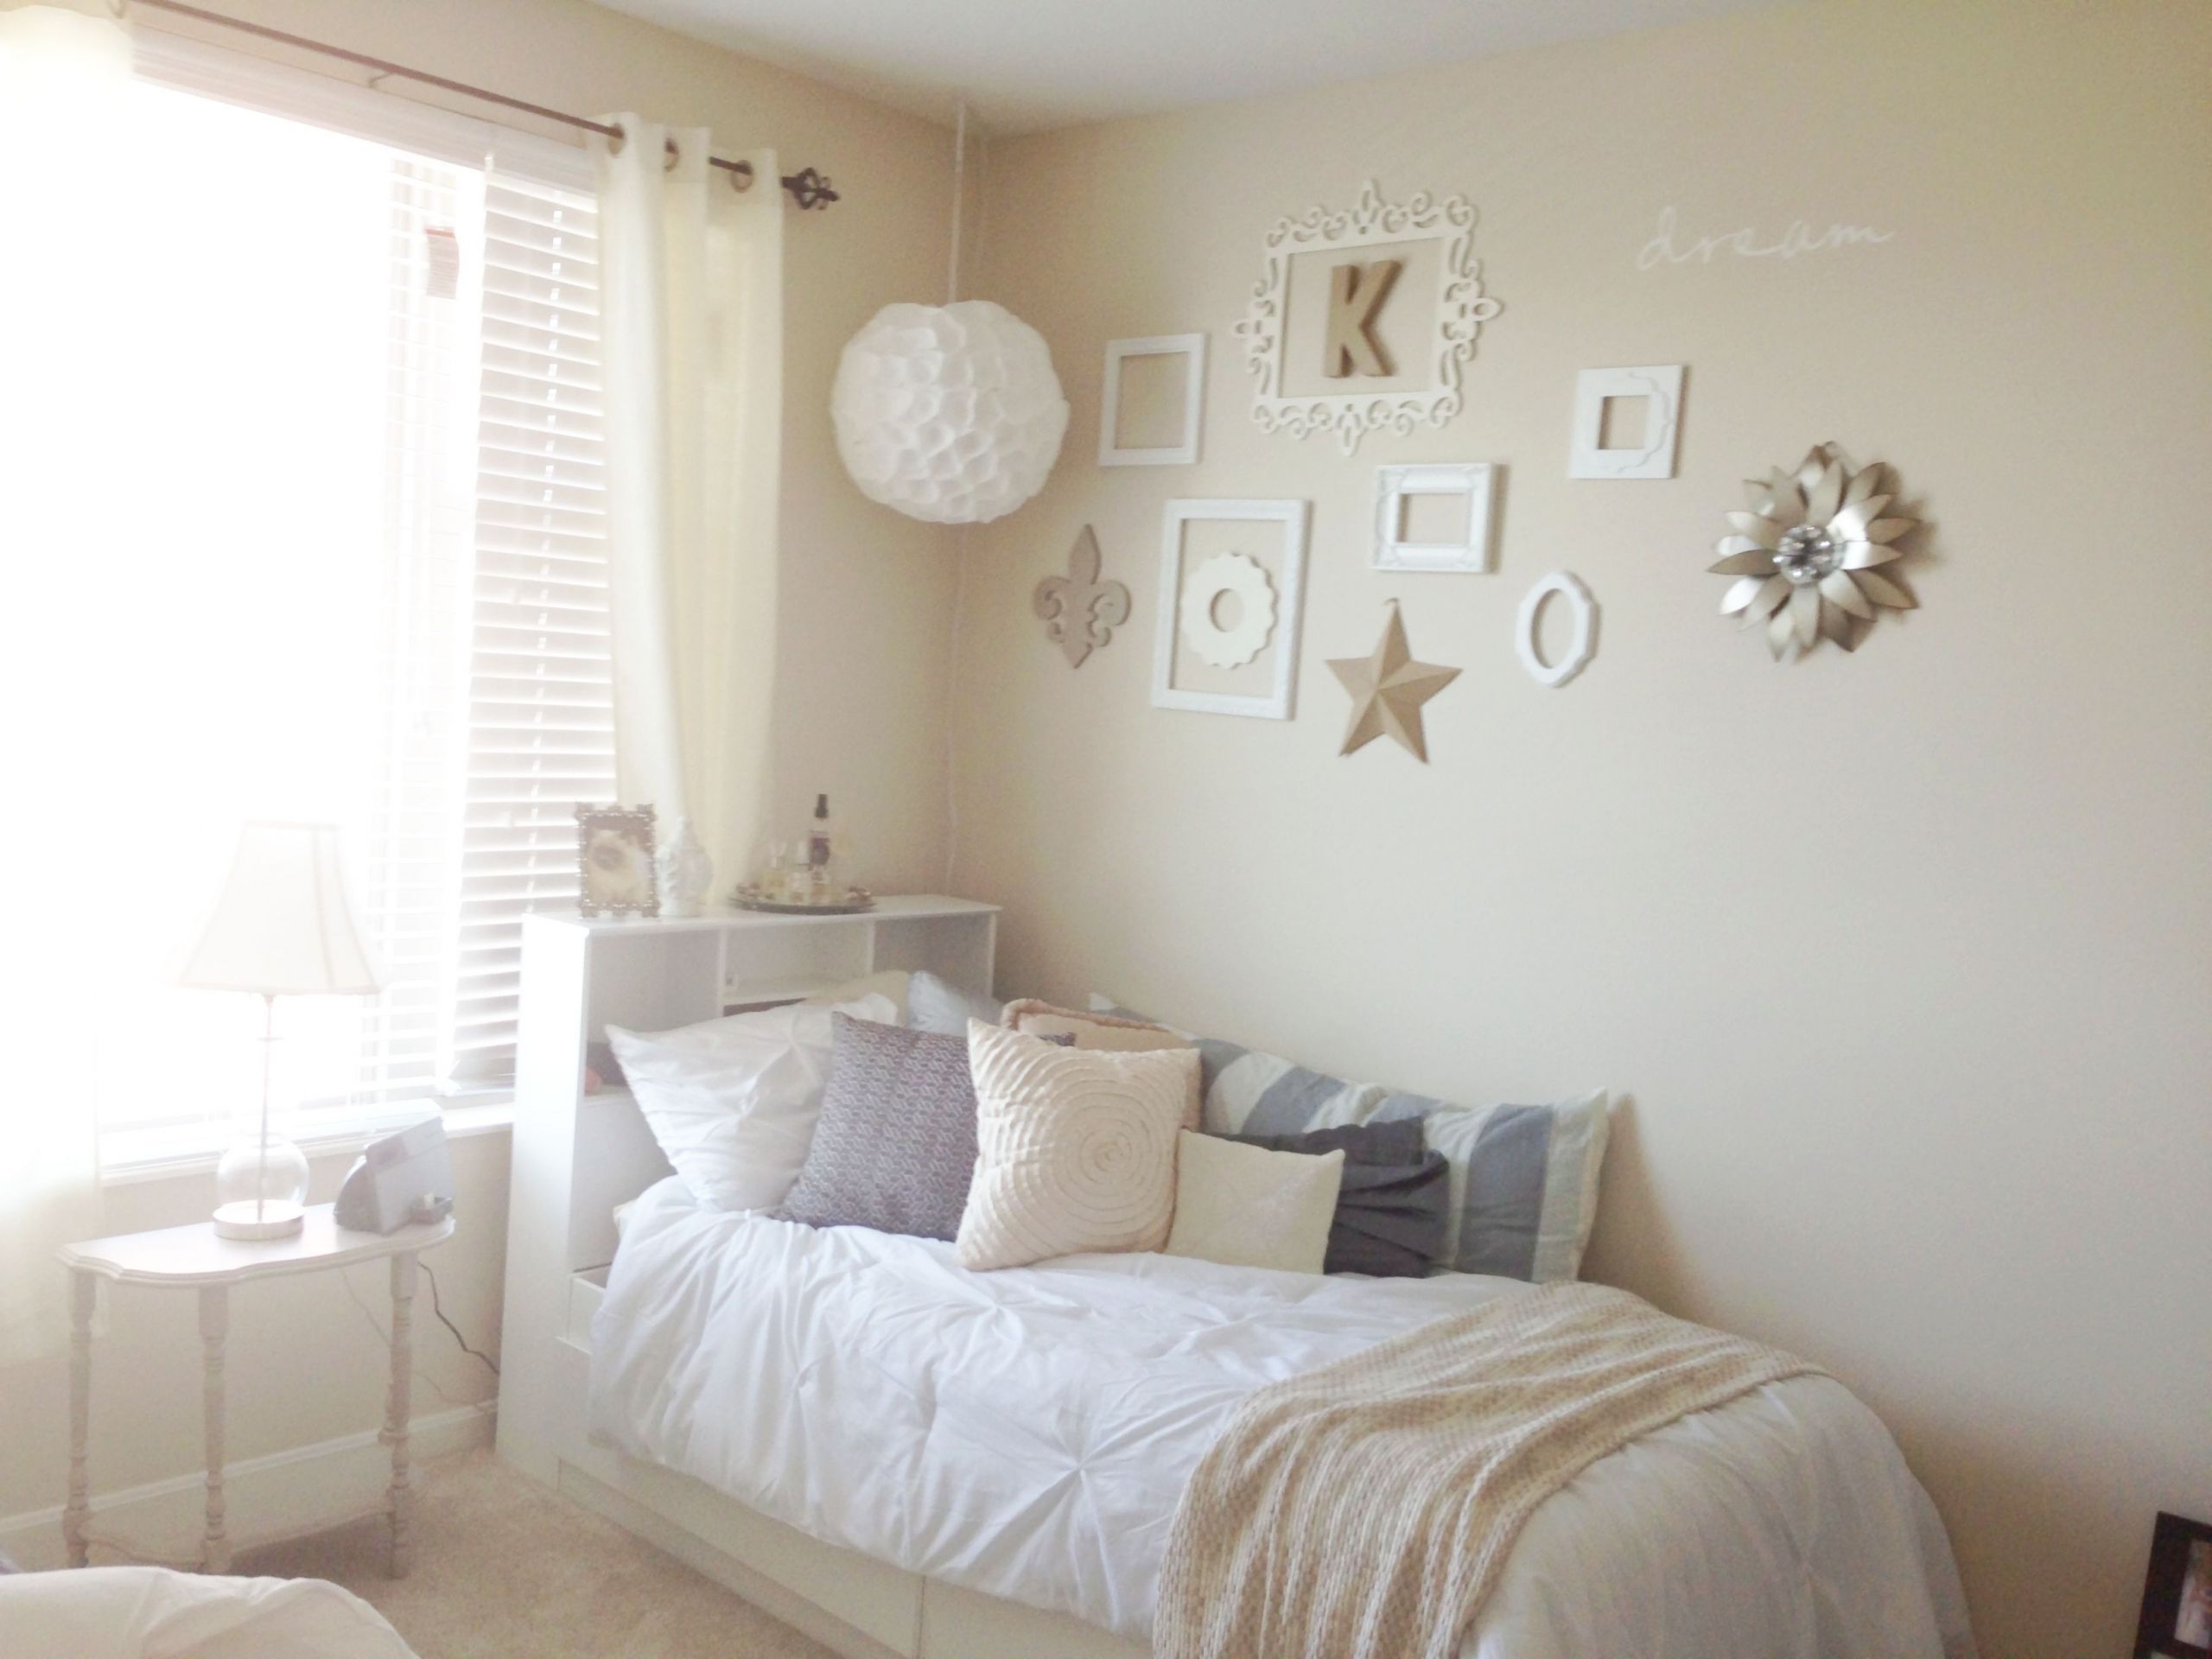 DIY College Apartment Decorating
 Chic college apartment bedroom even though it seems